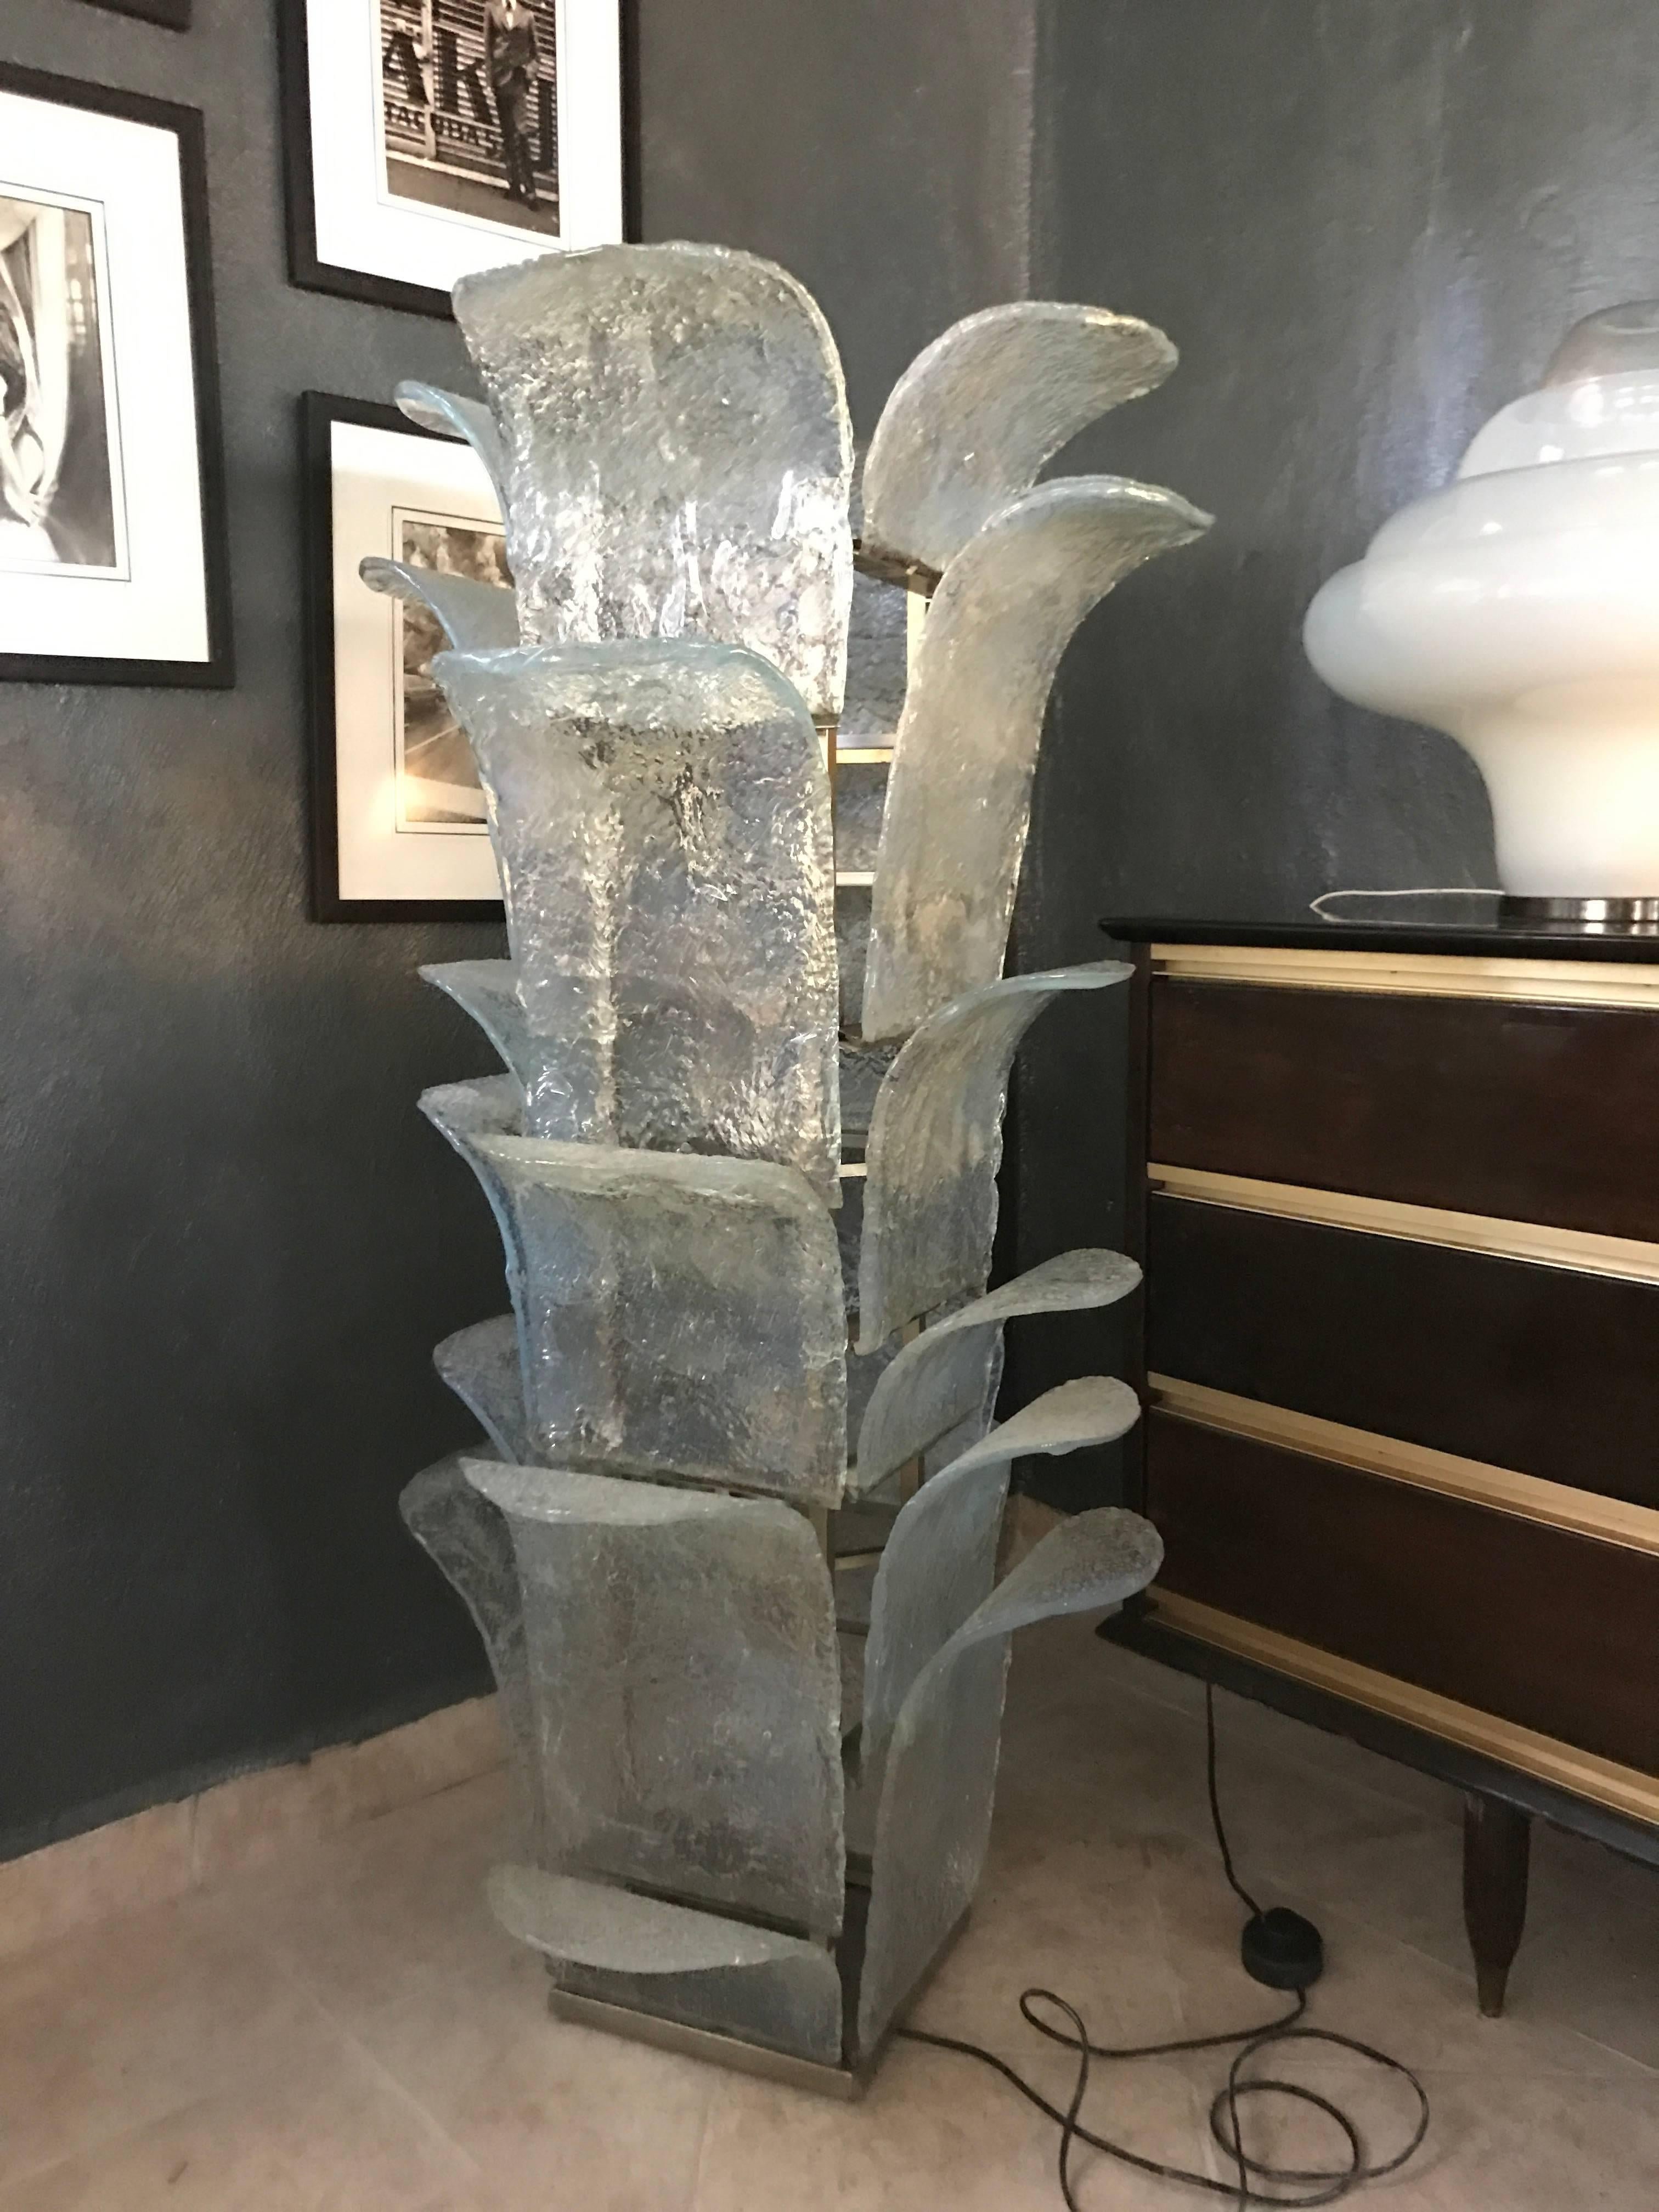 Beautiful Mid-Century Modern floor Lamp designed circa 1960 by Carlo Nason For Mazzega in Murano Italy, in the shape of a cactus.